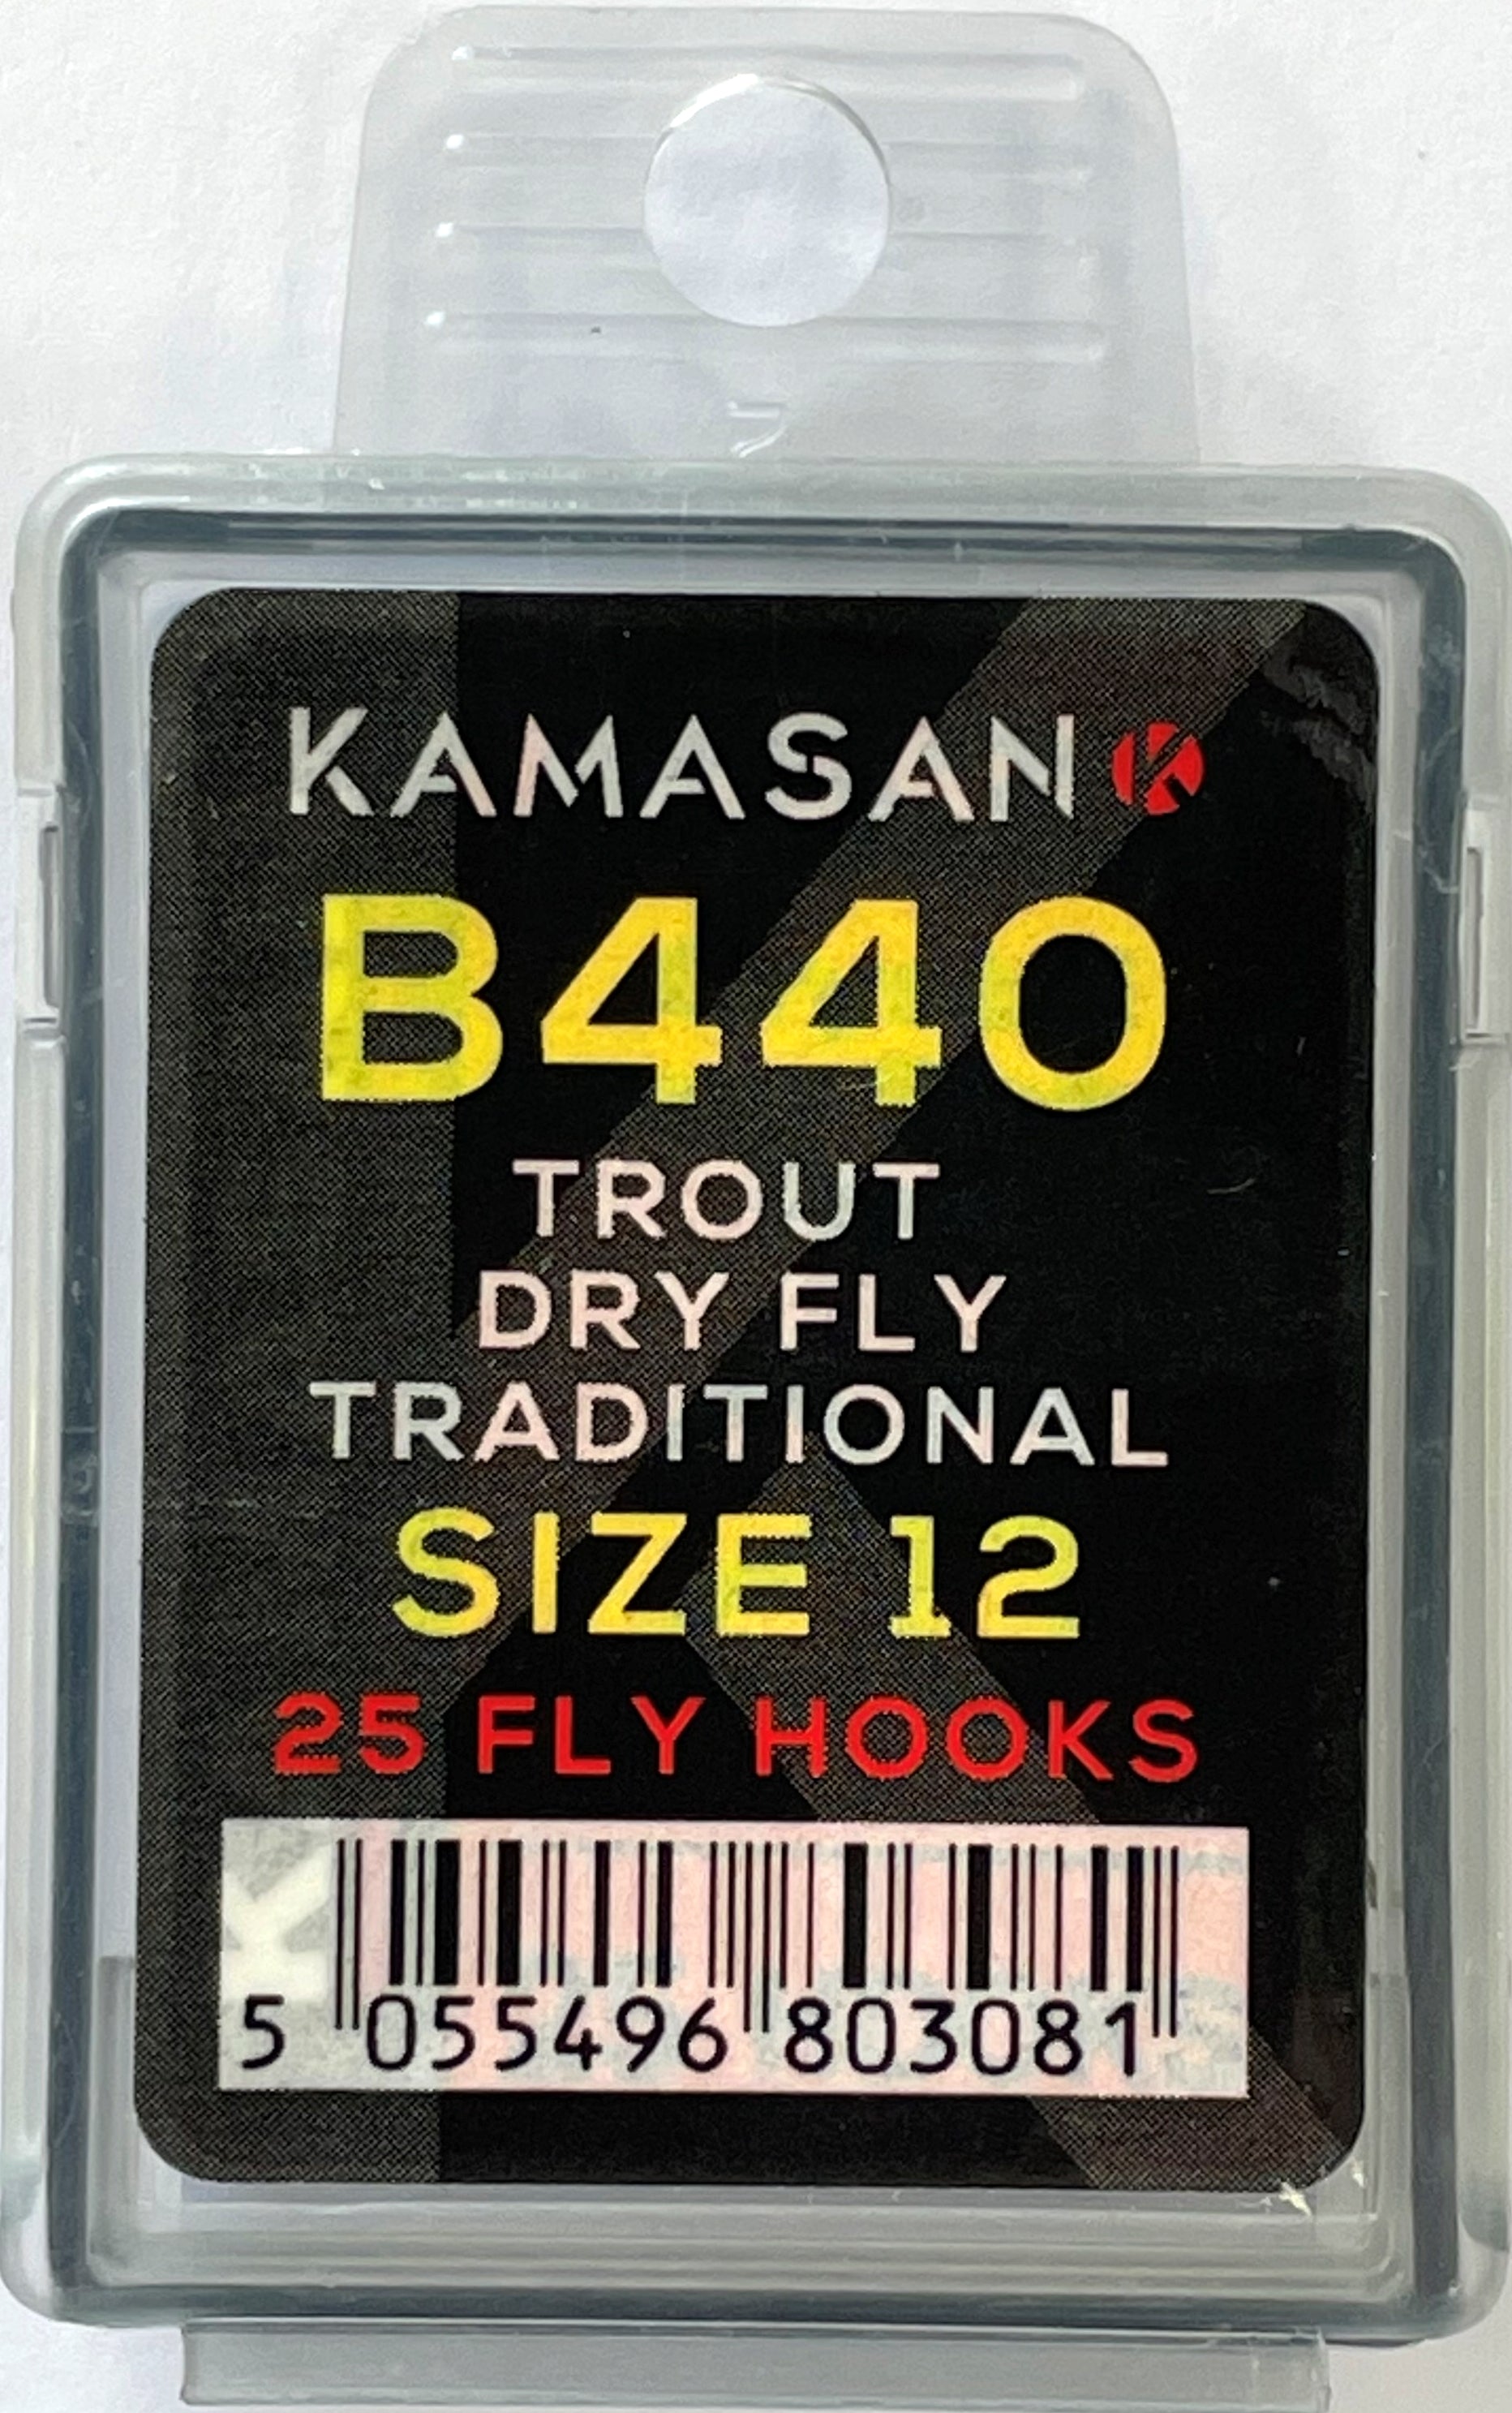 Kamasan B440 Trout Dry Fly Traditional Fly Hooks (Size 12